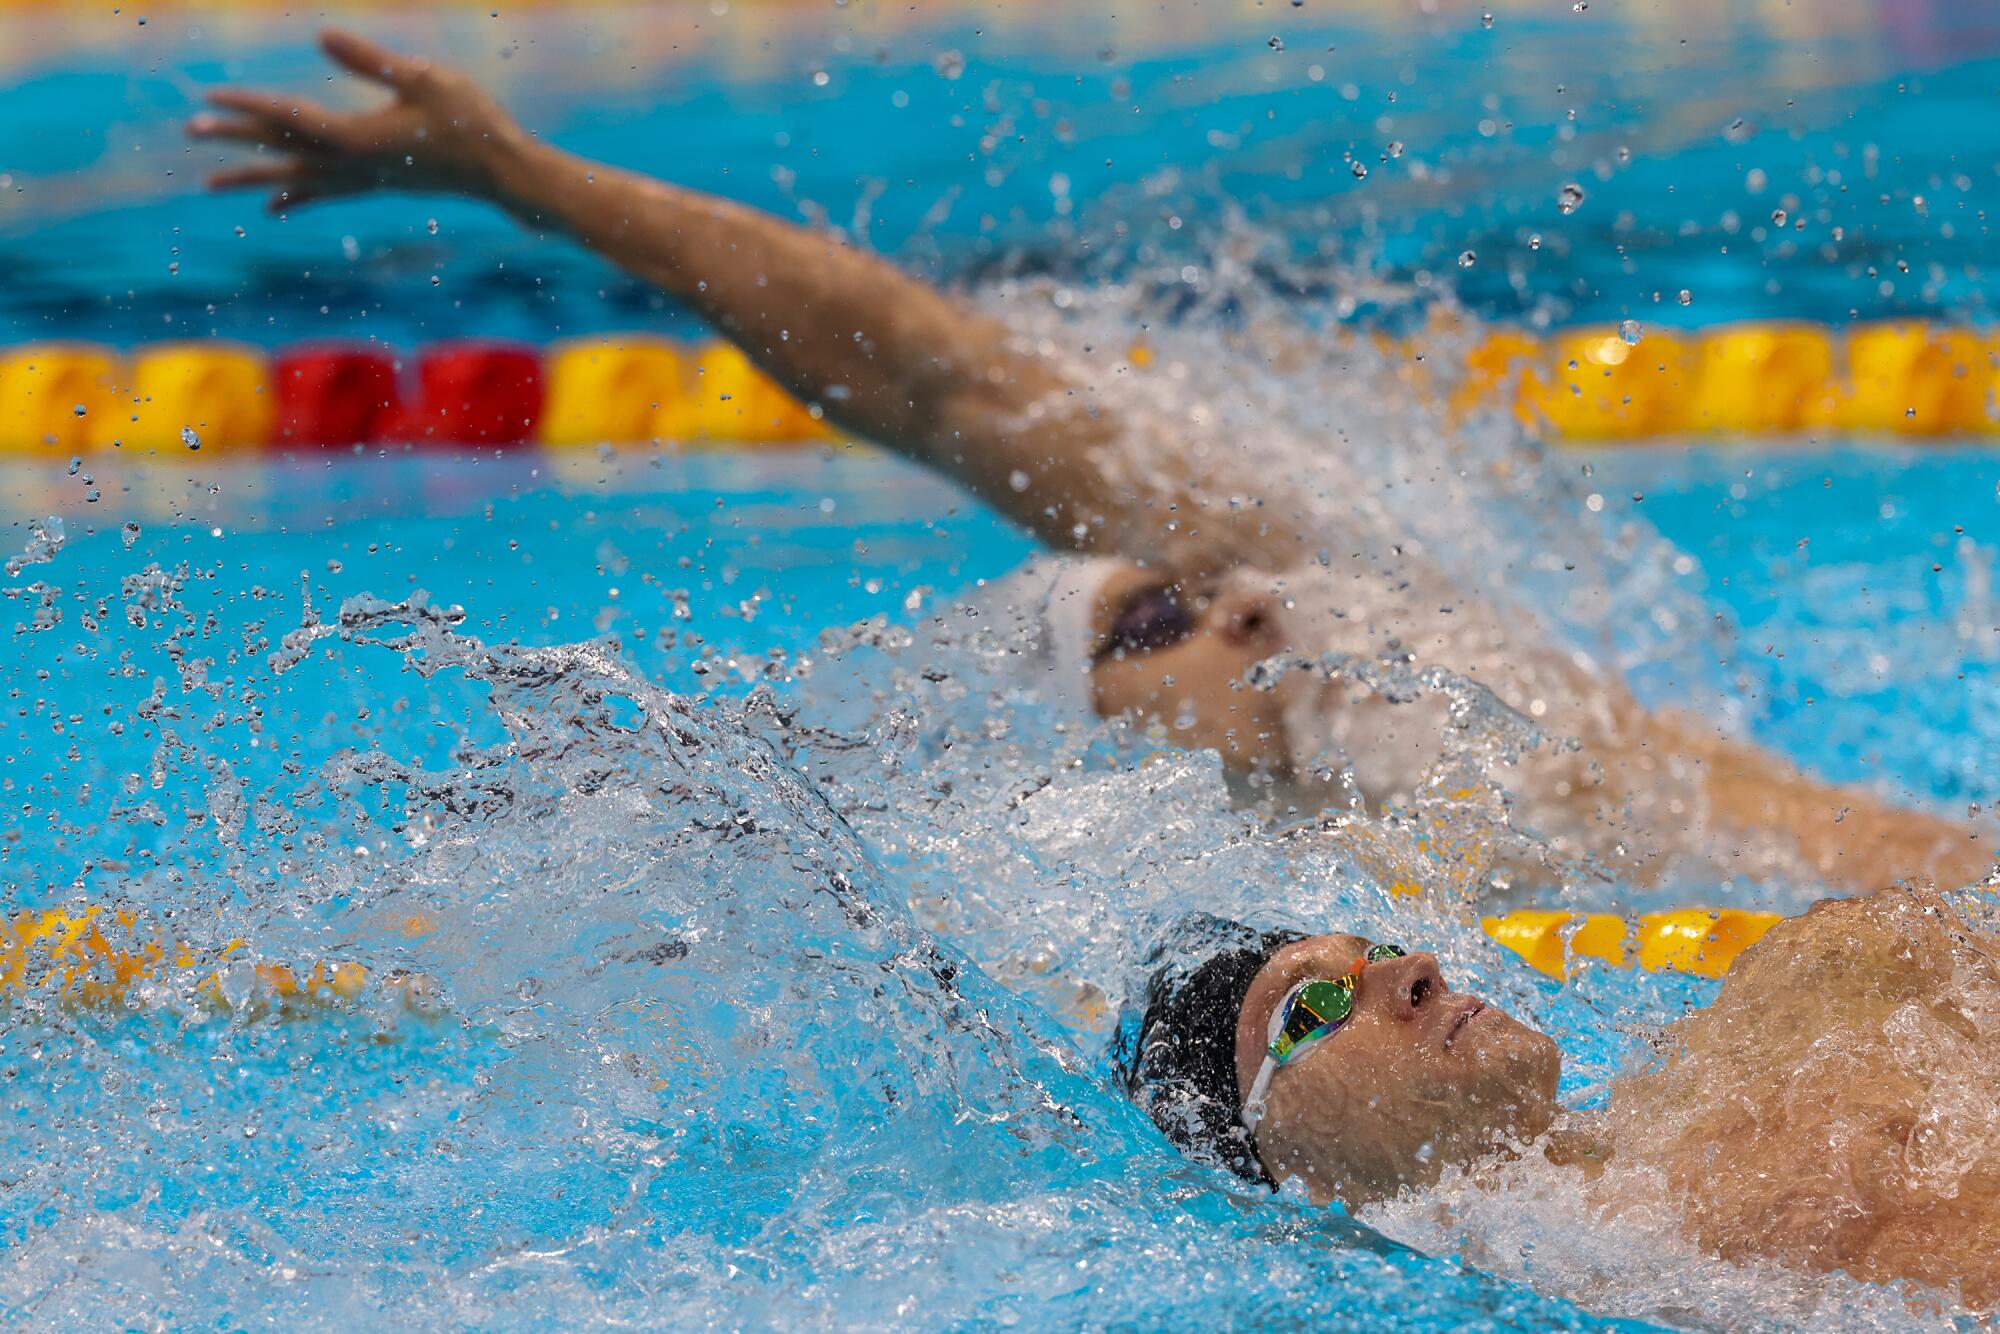 USA's Ryan Murphy swims to a Silver Medal in the Men's 200m Backstroke Final